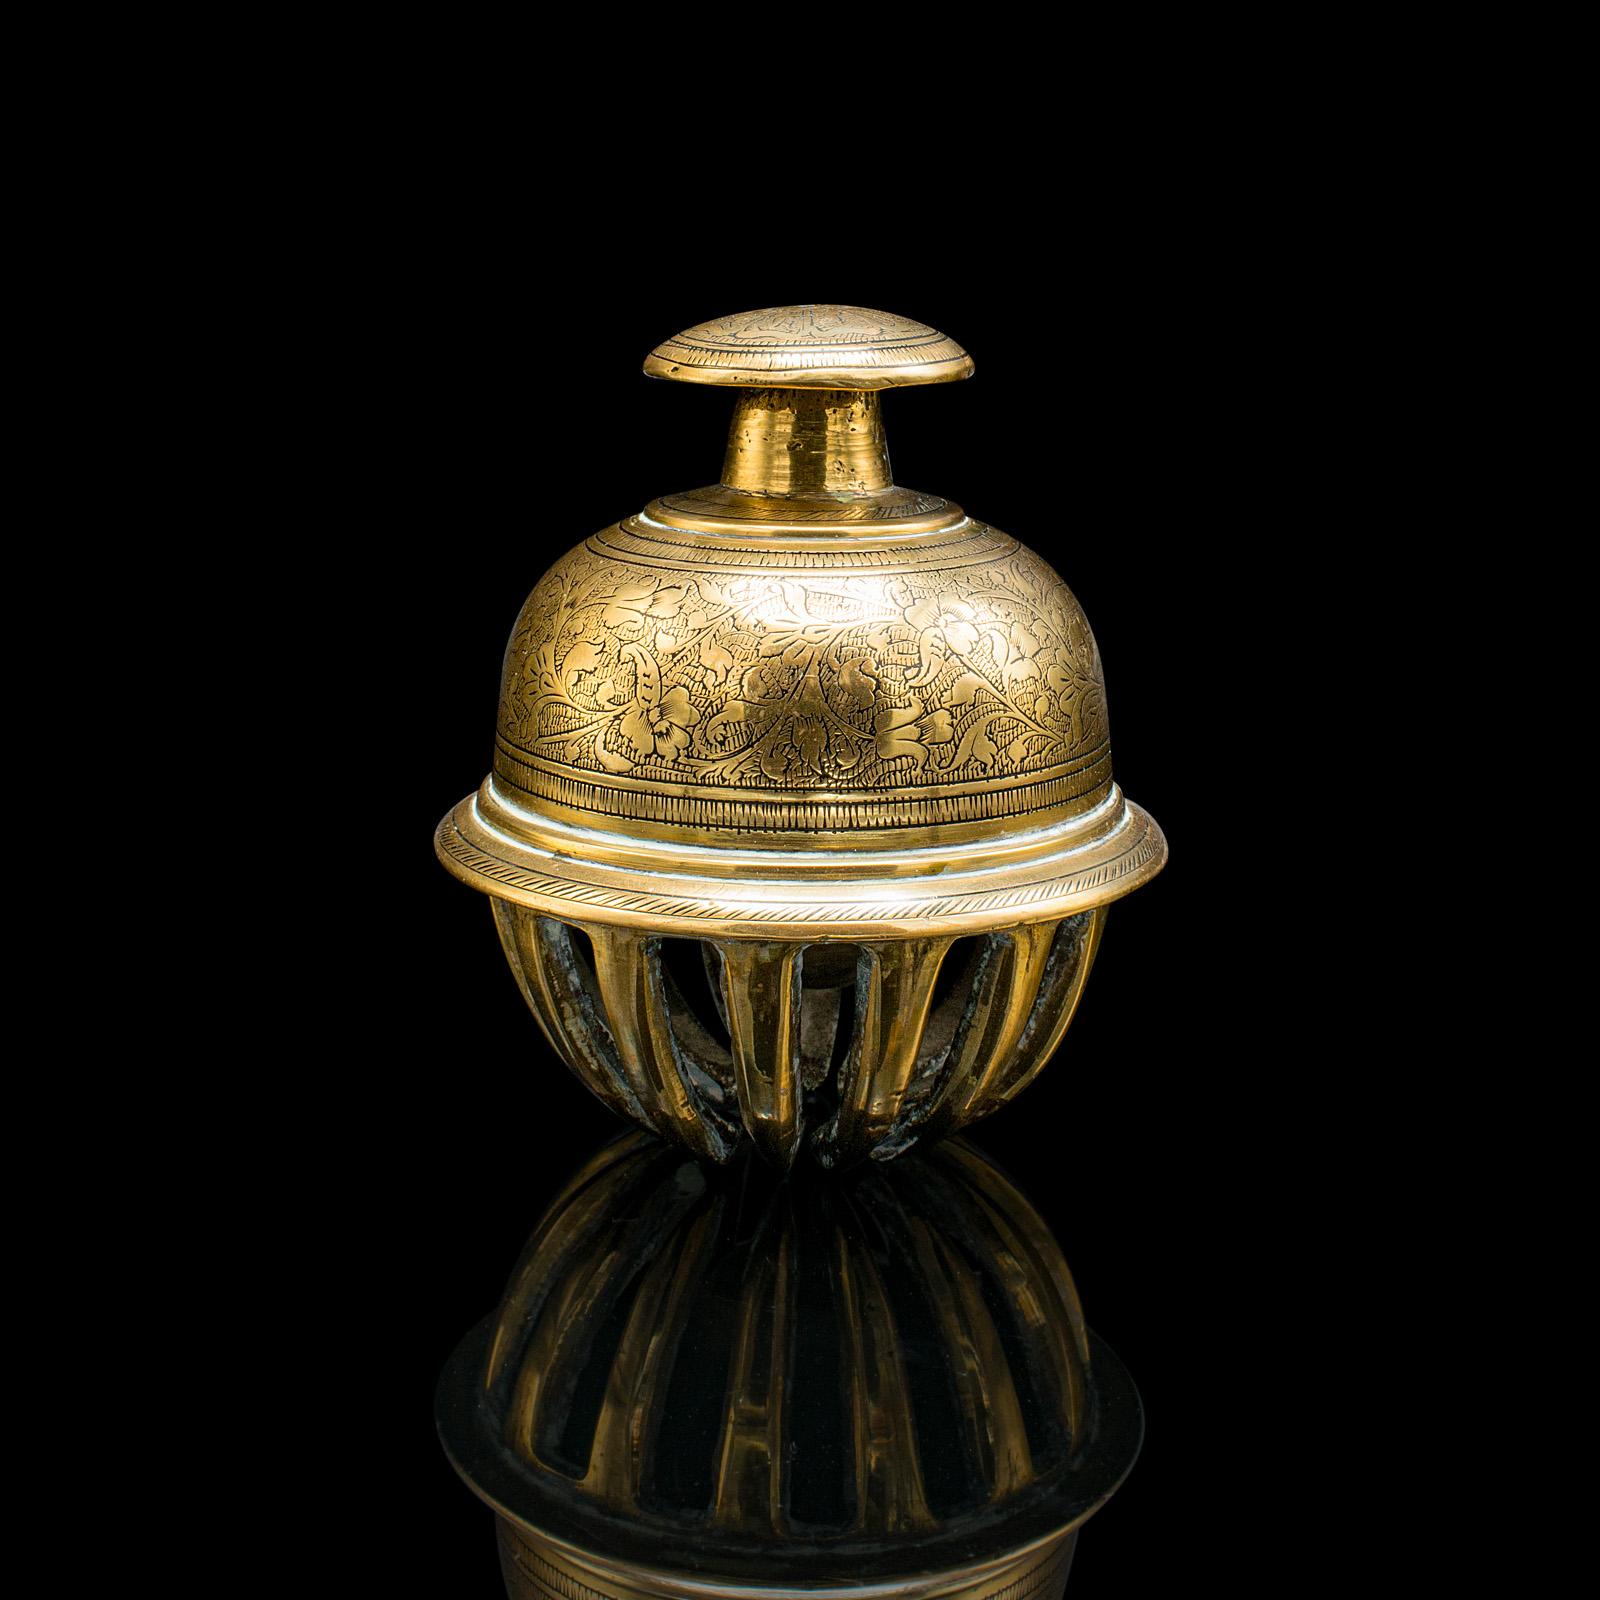 This is a small antique temple bell. An Oriental, brass tea calling chime, dating to the early 20th century, circa 1920.

An appealing small bell with a charming ring
Displaying a desirable aged patina throughout
Brass presents bright golden